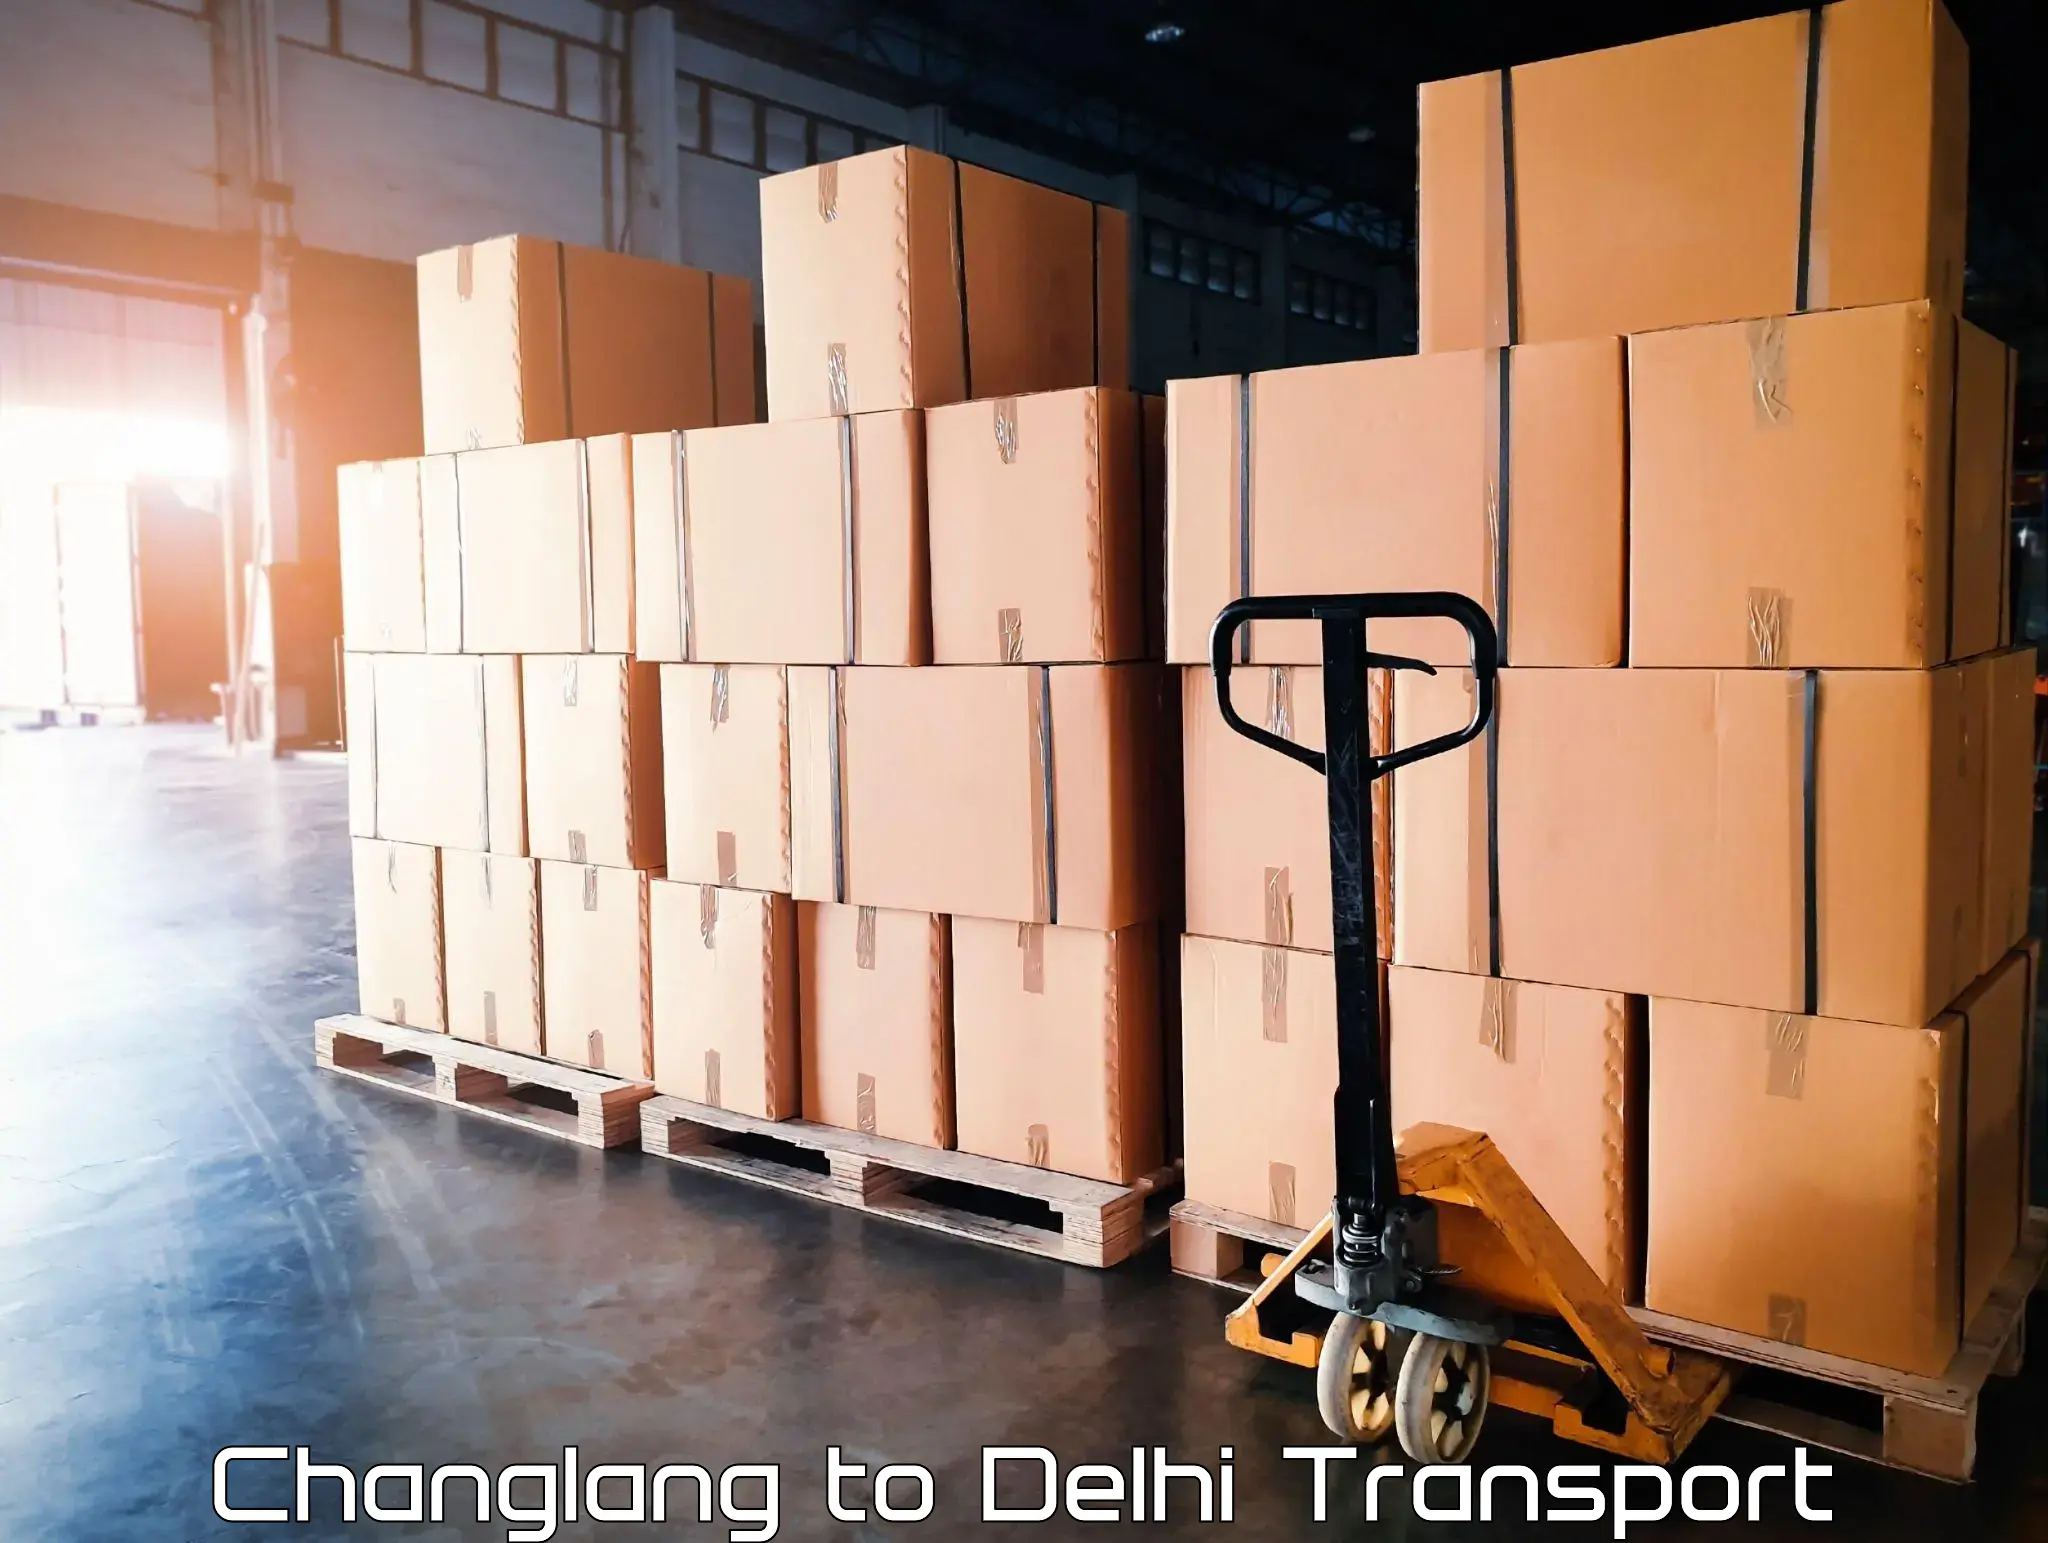 Goods delivery service Changlang to Jawaharlal Nehru University New Delhi